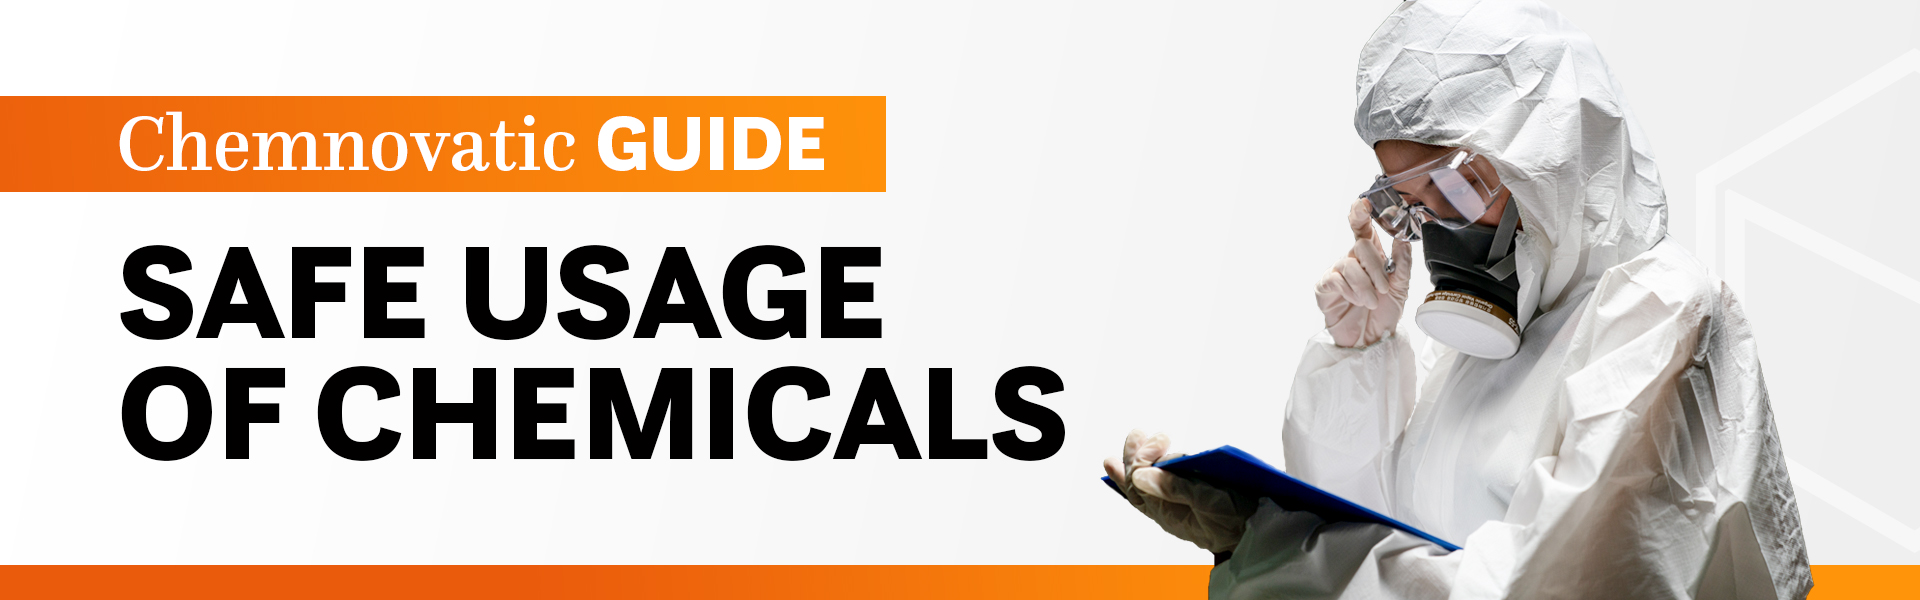 chemnovatic guide safe usage of chemicals